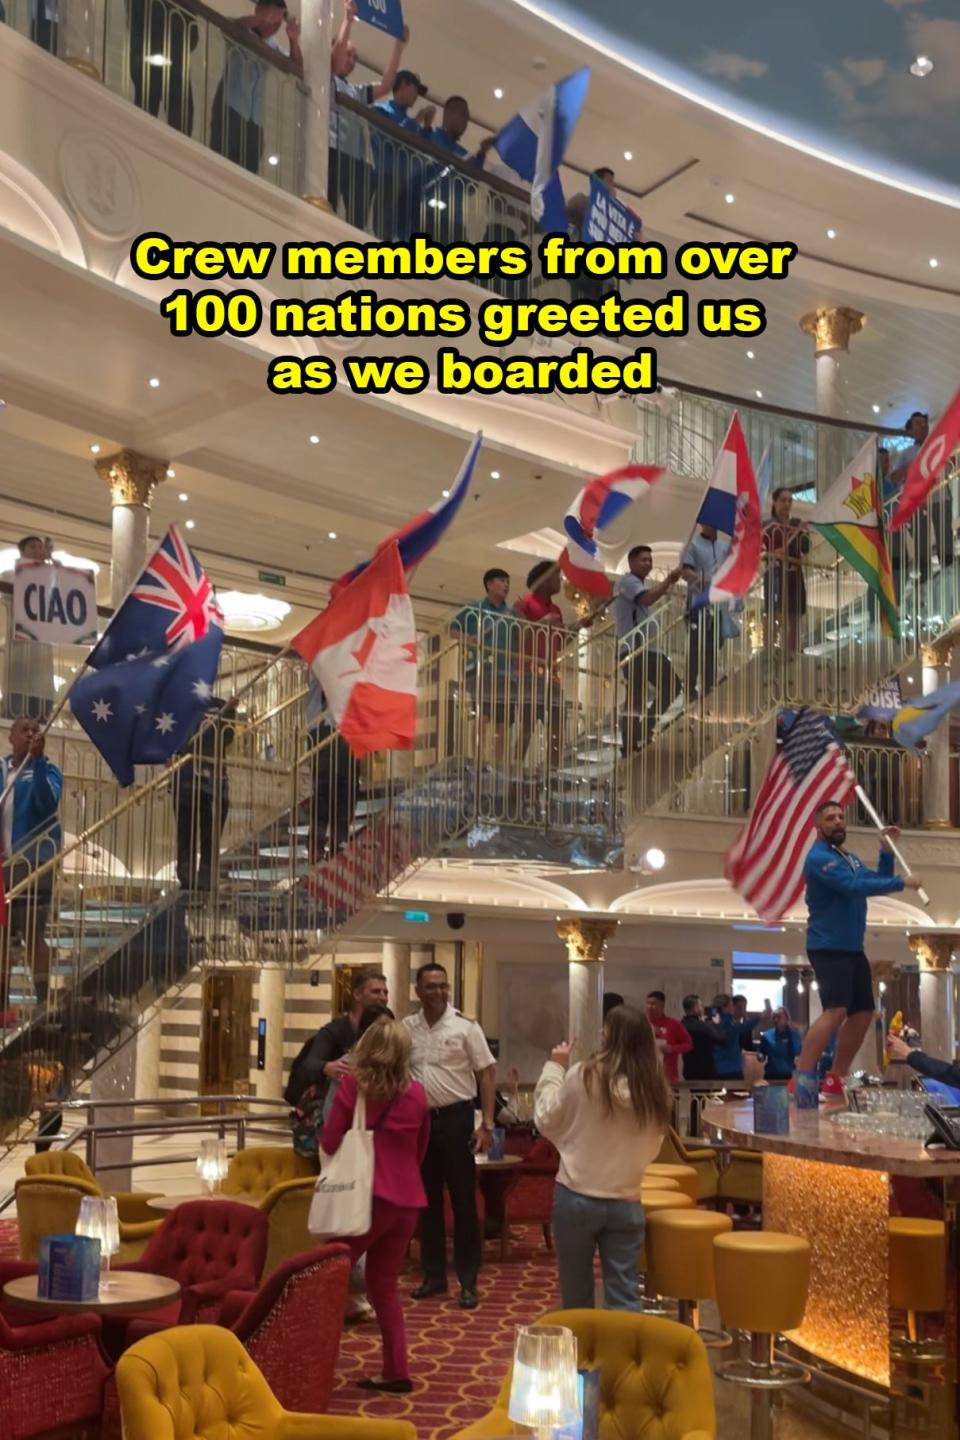 Cruise ship atrium with crew members holding various national flags above welcoming guests